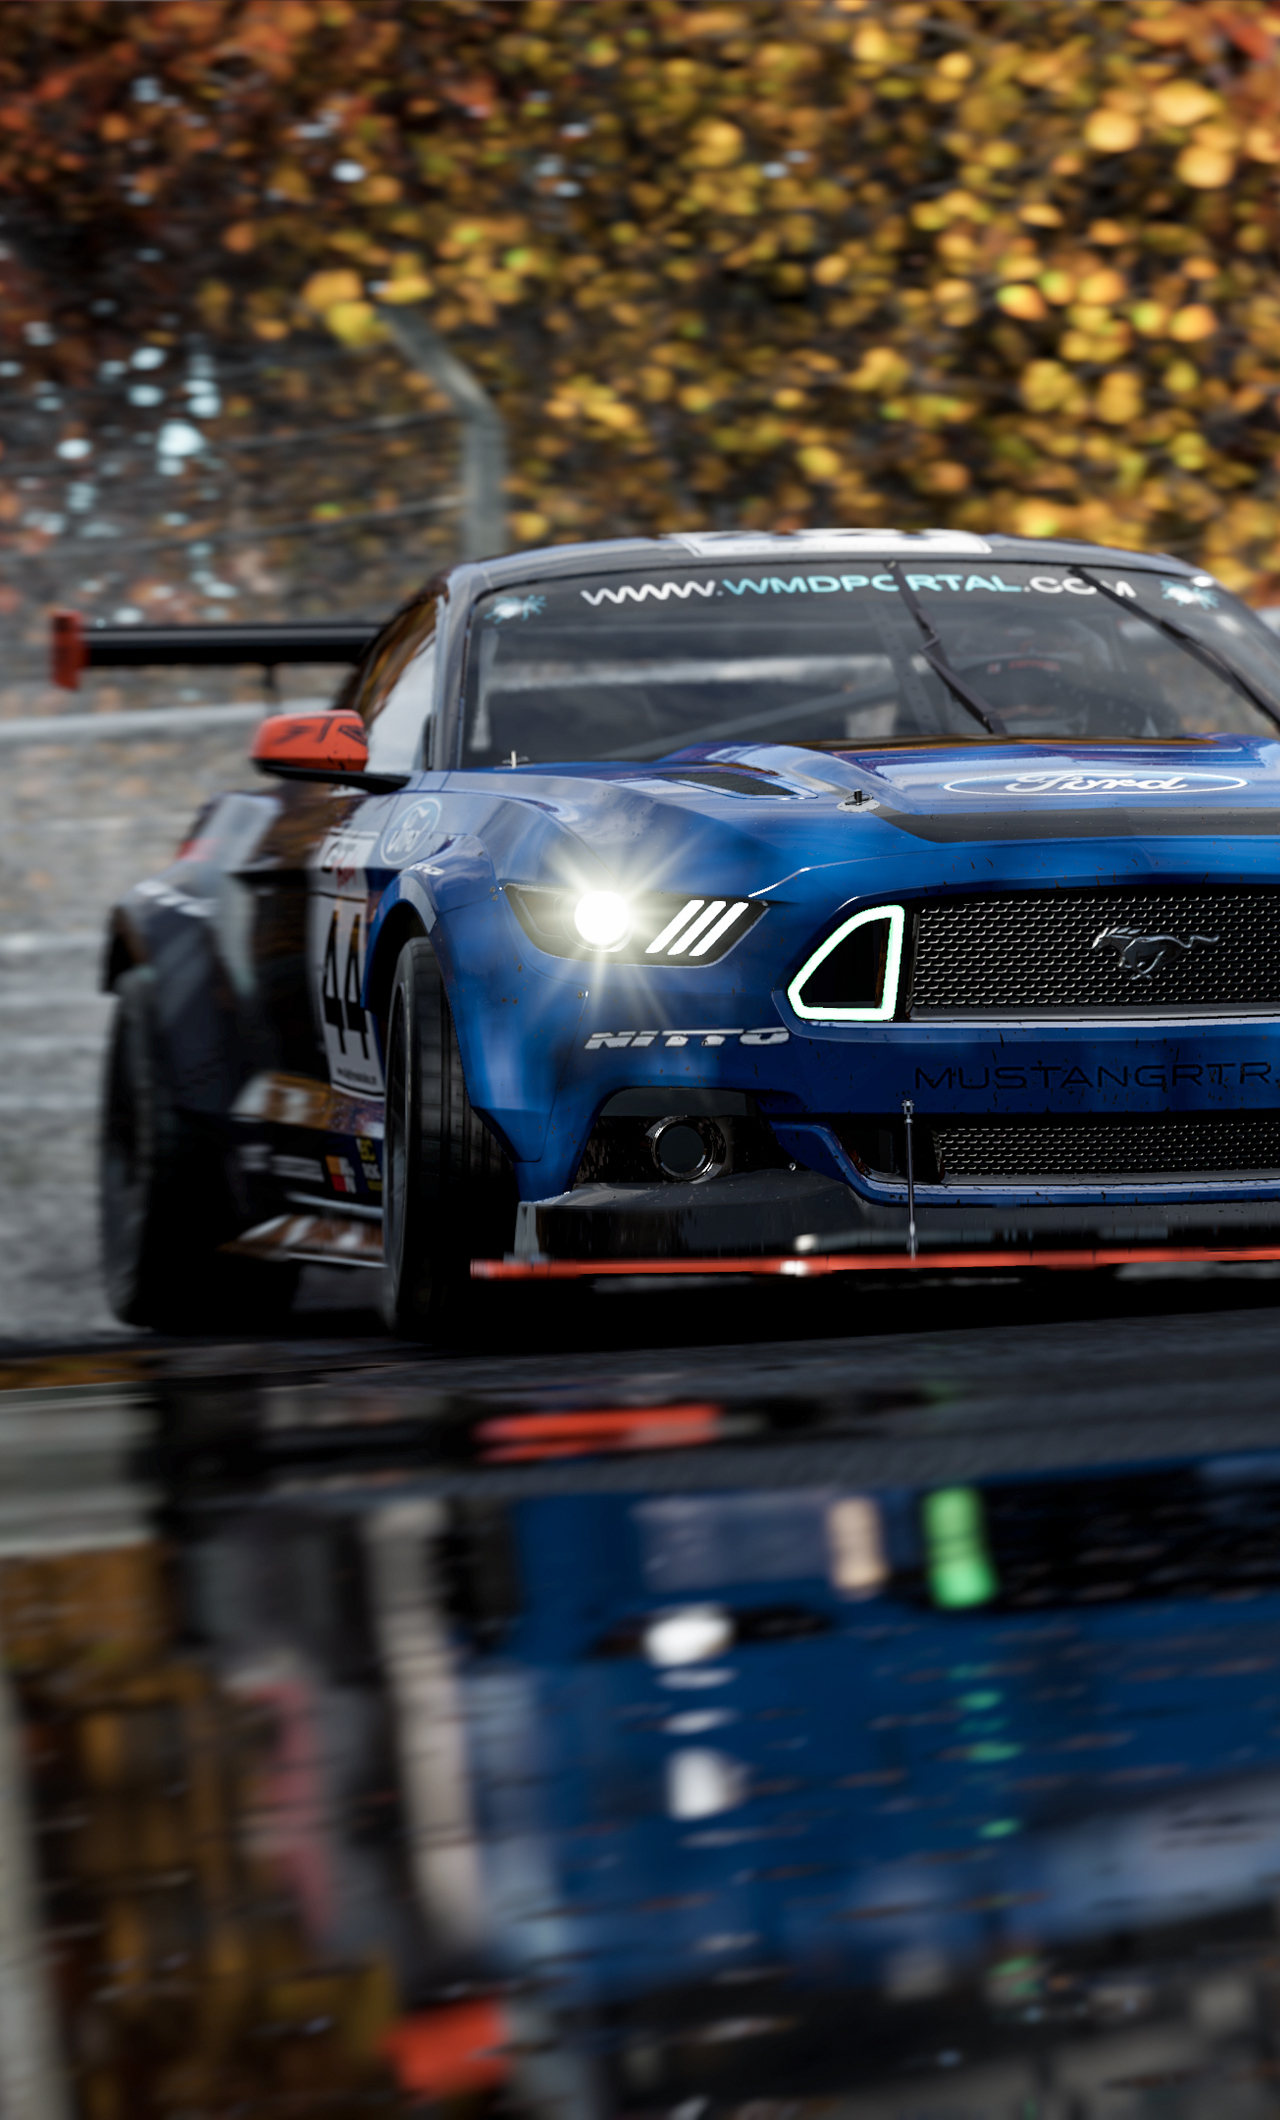 Ford Mustang Rtr Project Cars 2 4k - Project Cars 2 Wallpaper 4k , HD Wallpaper & Backgrounds